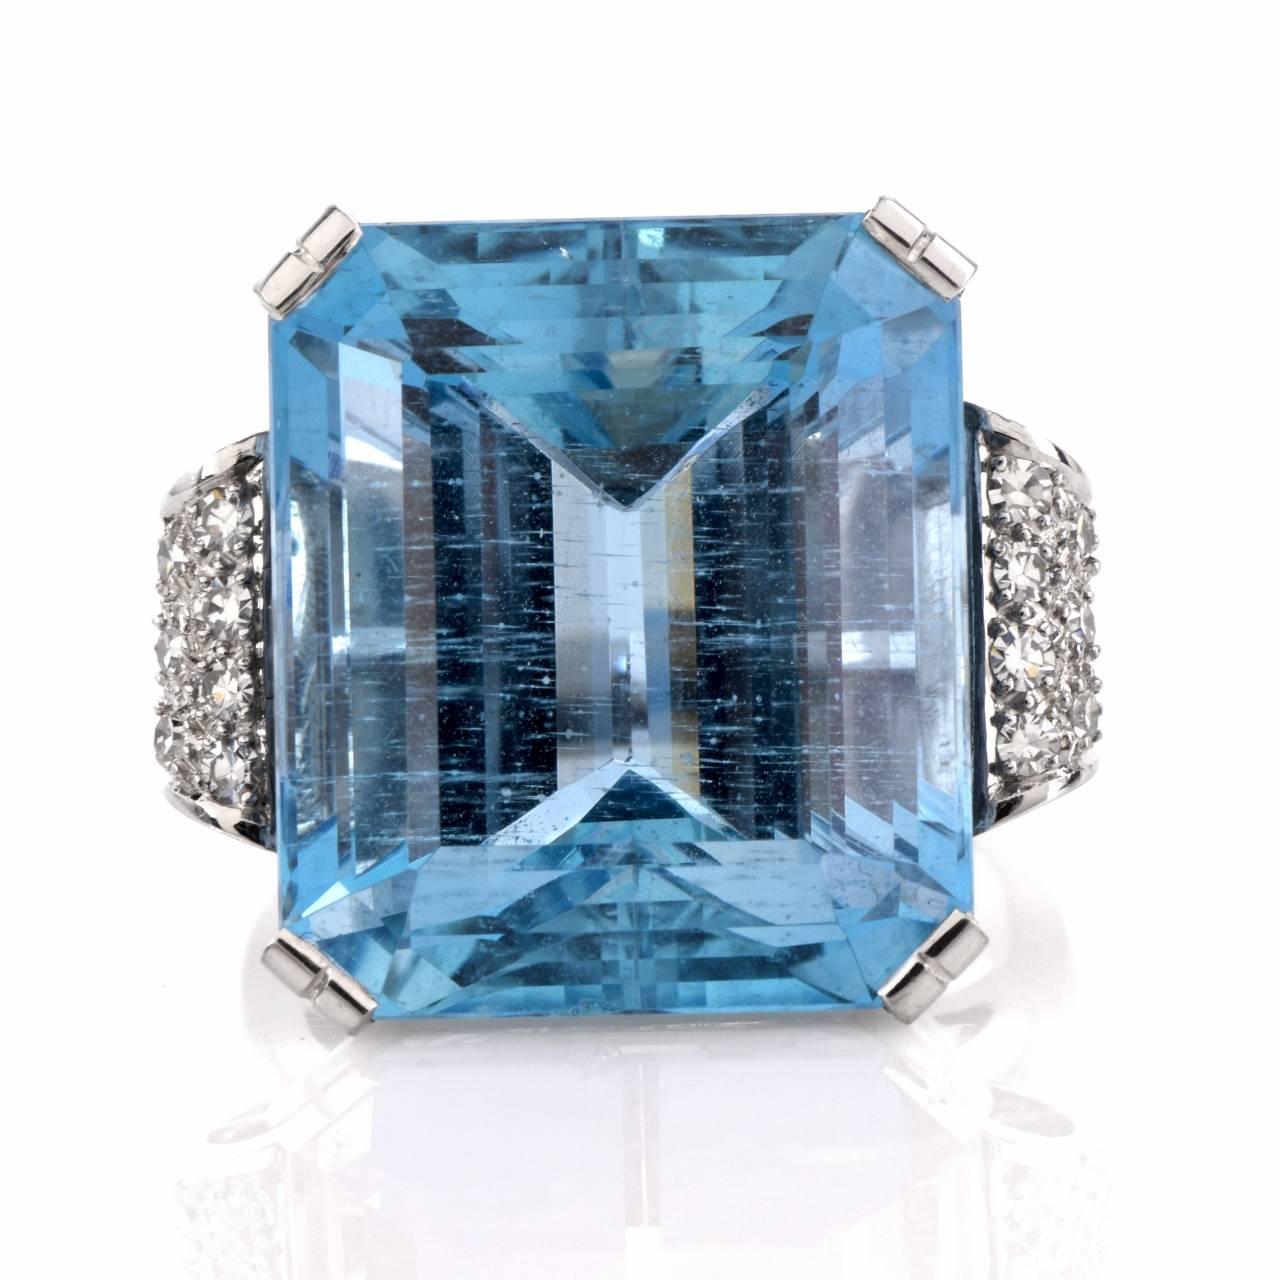 This stunning vintage ring circa 1950's is the perfect pop of color for any ensemble, a chic and stylish ring to own! Finely crafted in platinum, this ring features 1 genuine emerald cut fine Great blue aquamarine approx. 23.44ct. The gorgeous